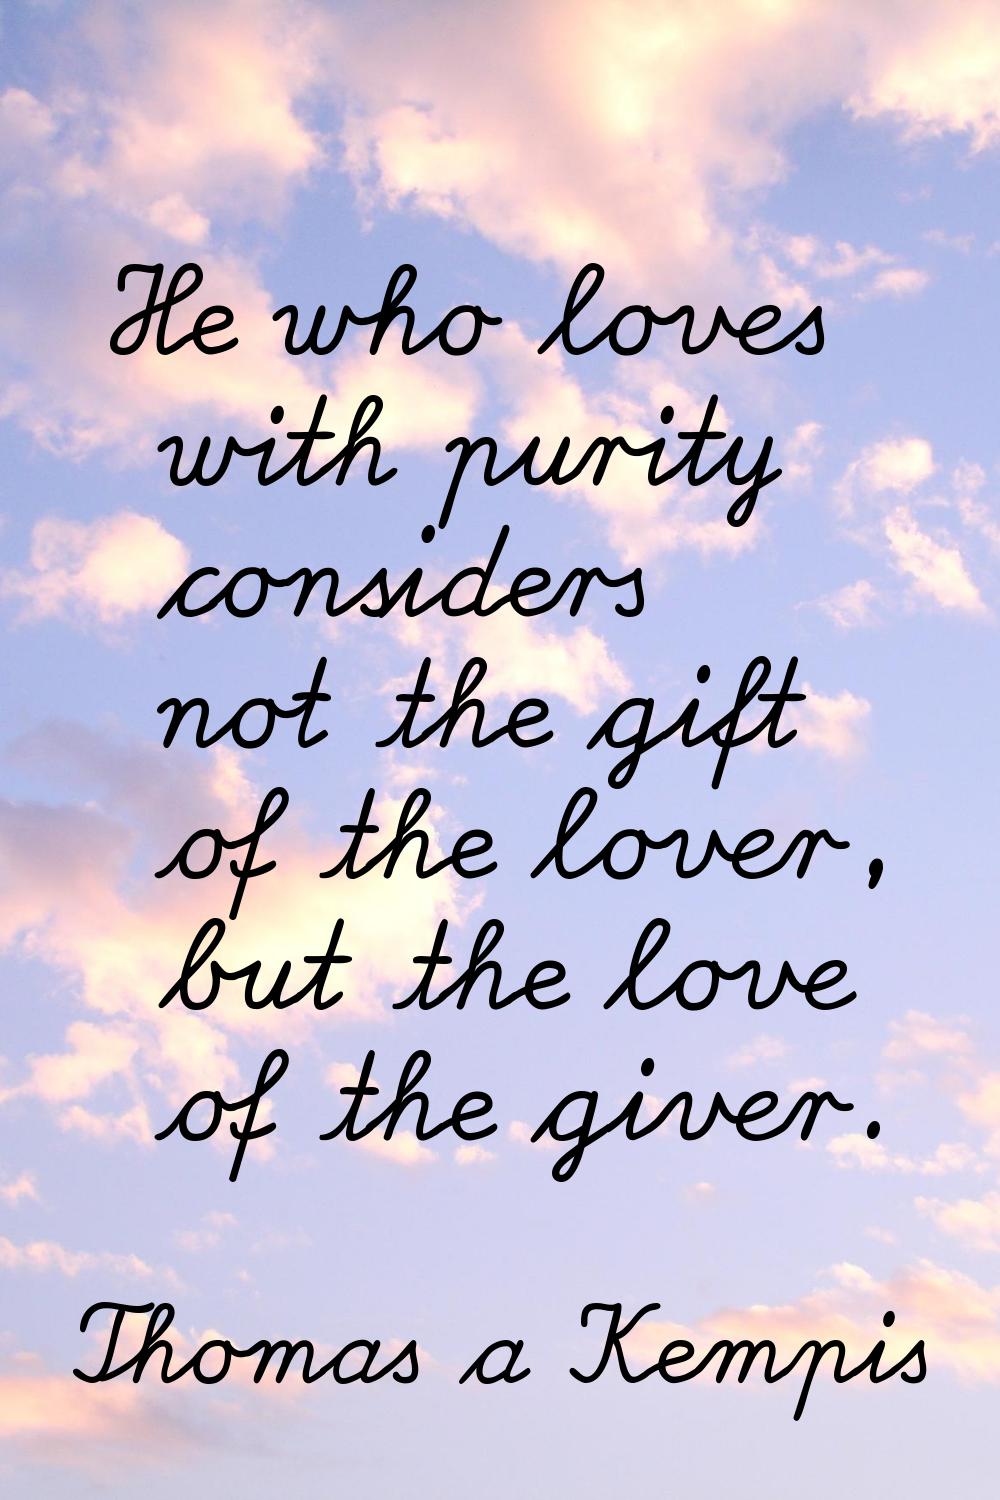 He who loves with purity considers not the gift of the lover, but the love of the giver.